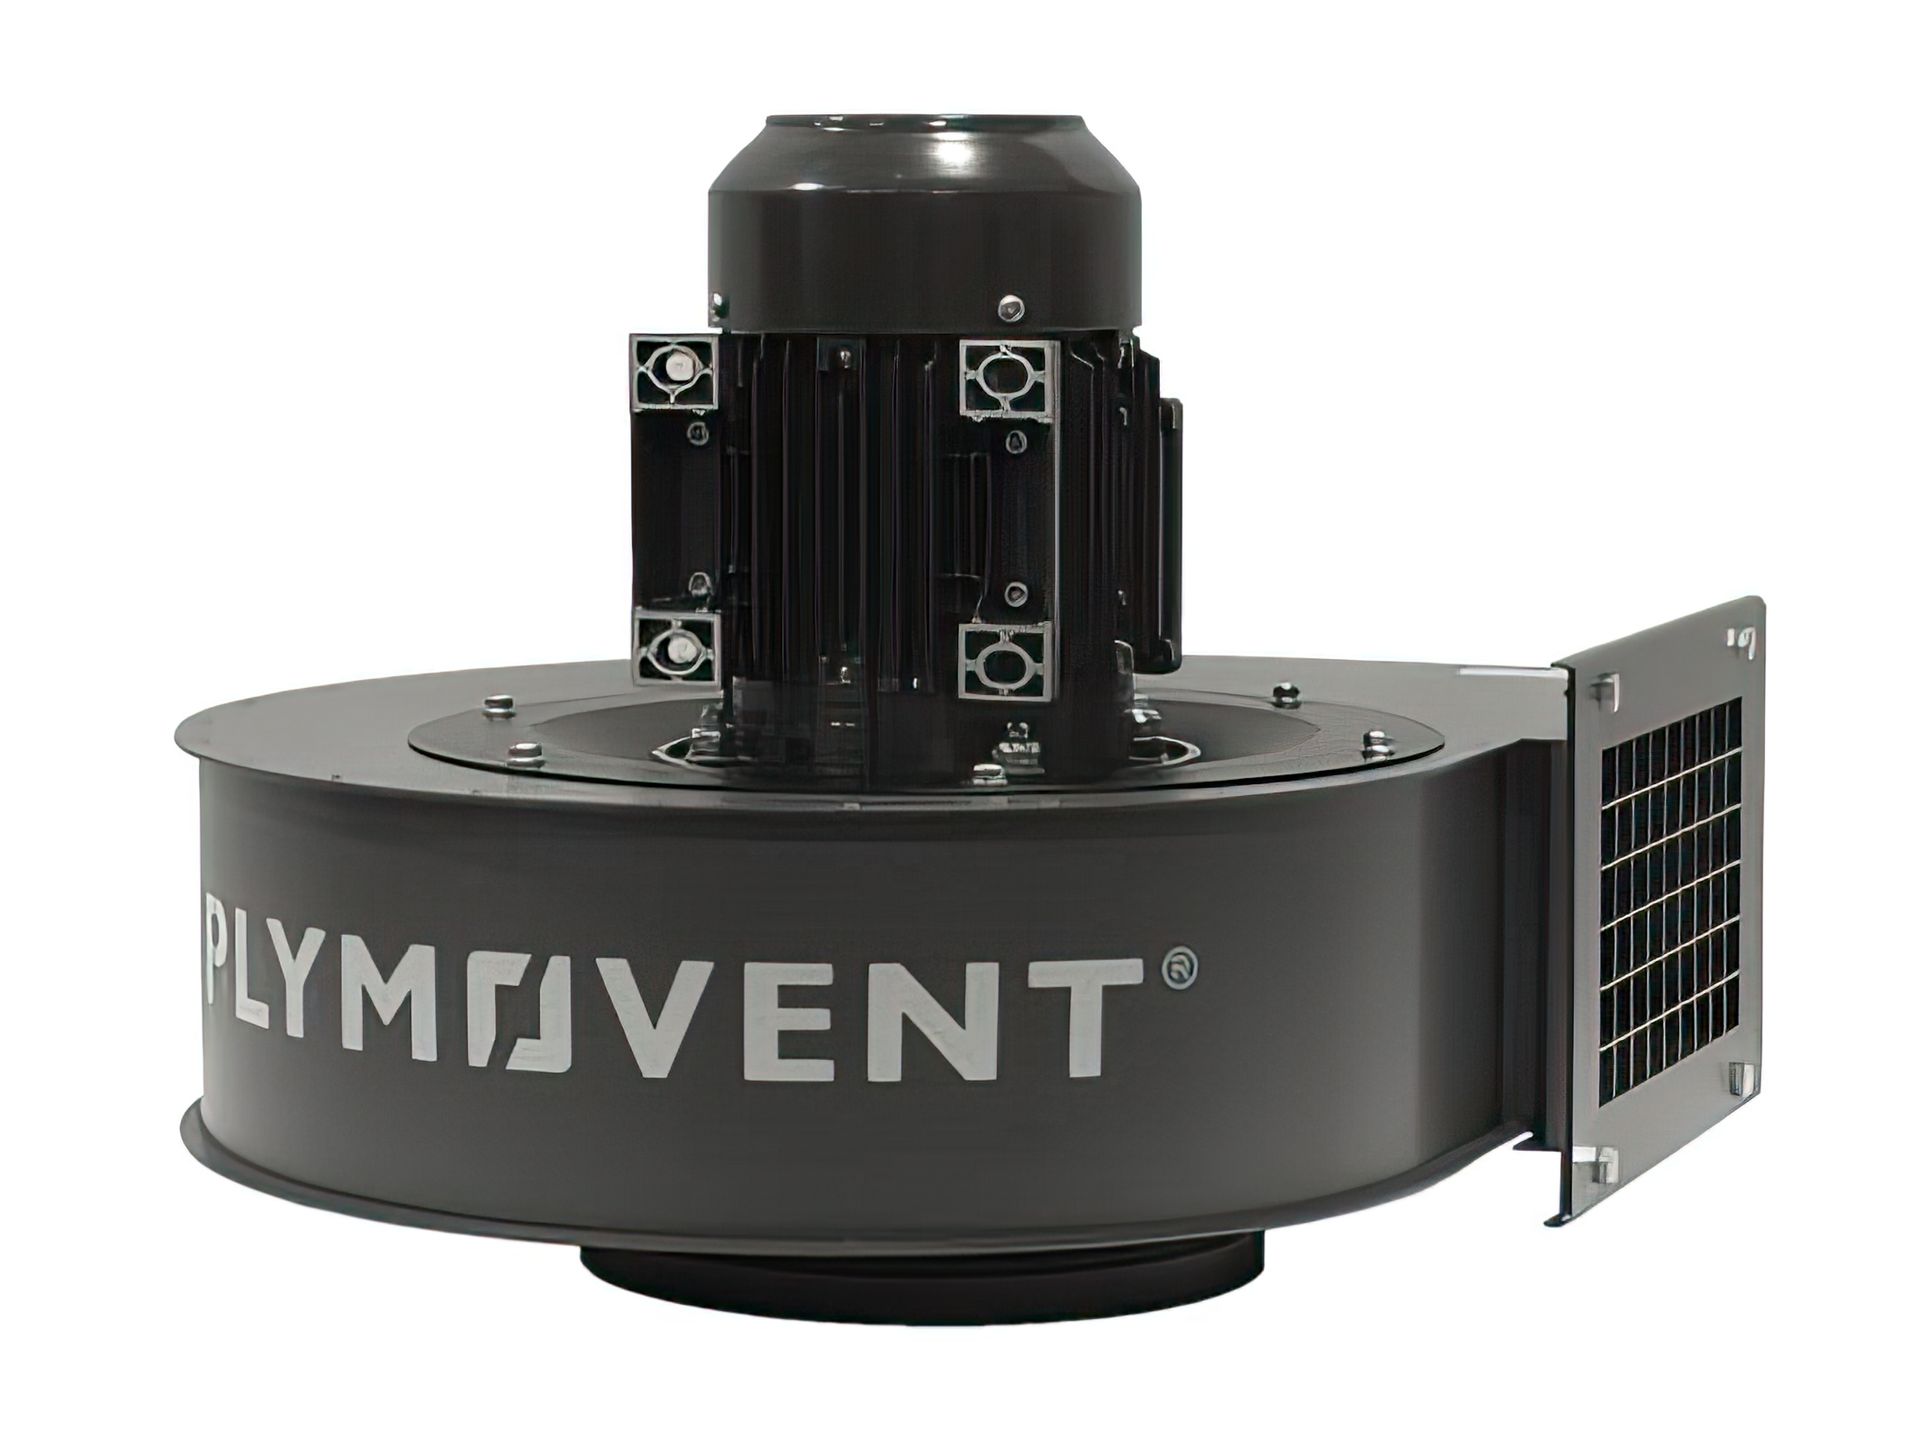 Plymovent Industrial Equipment Vaughan | Plymovent equipment service and parts Vaughan